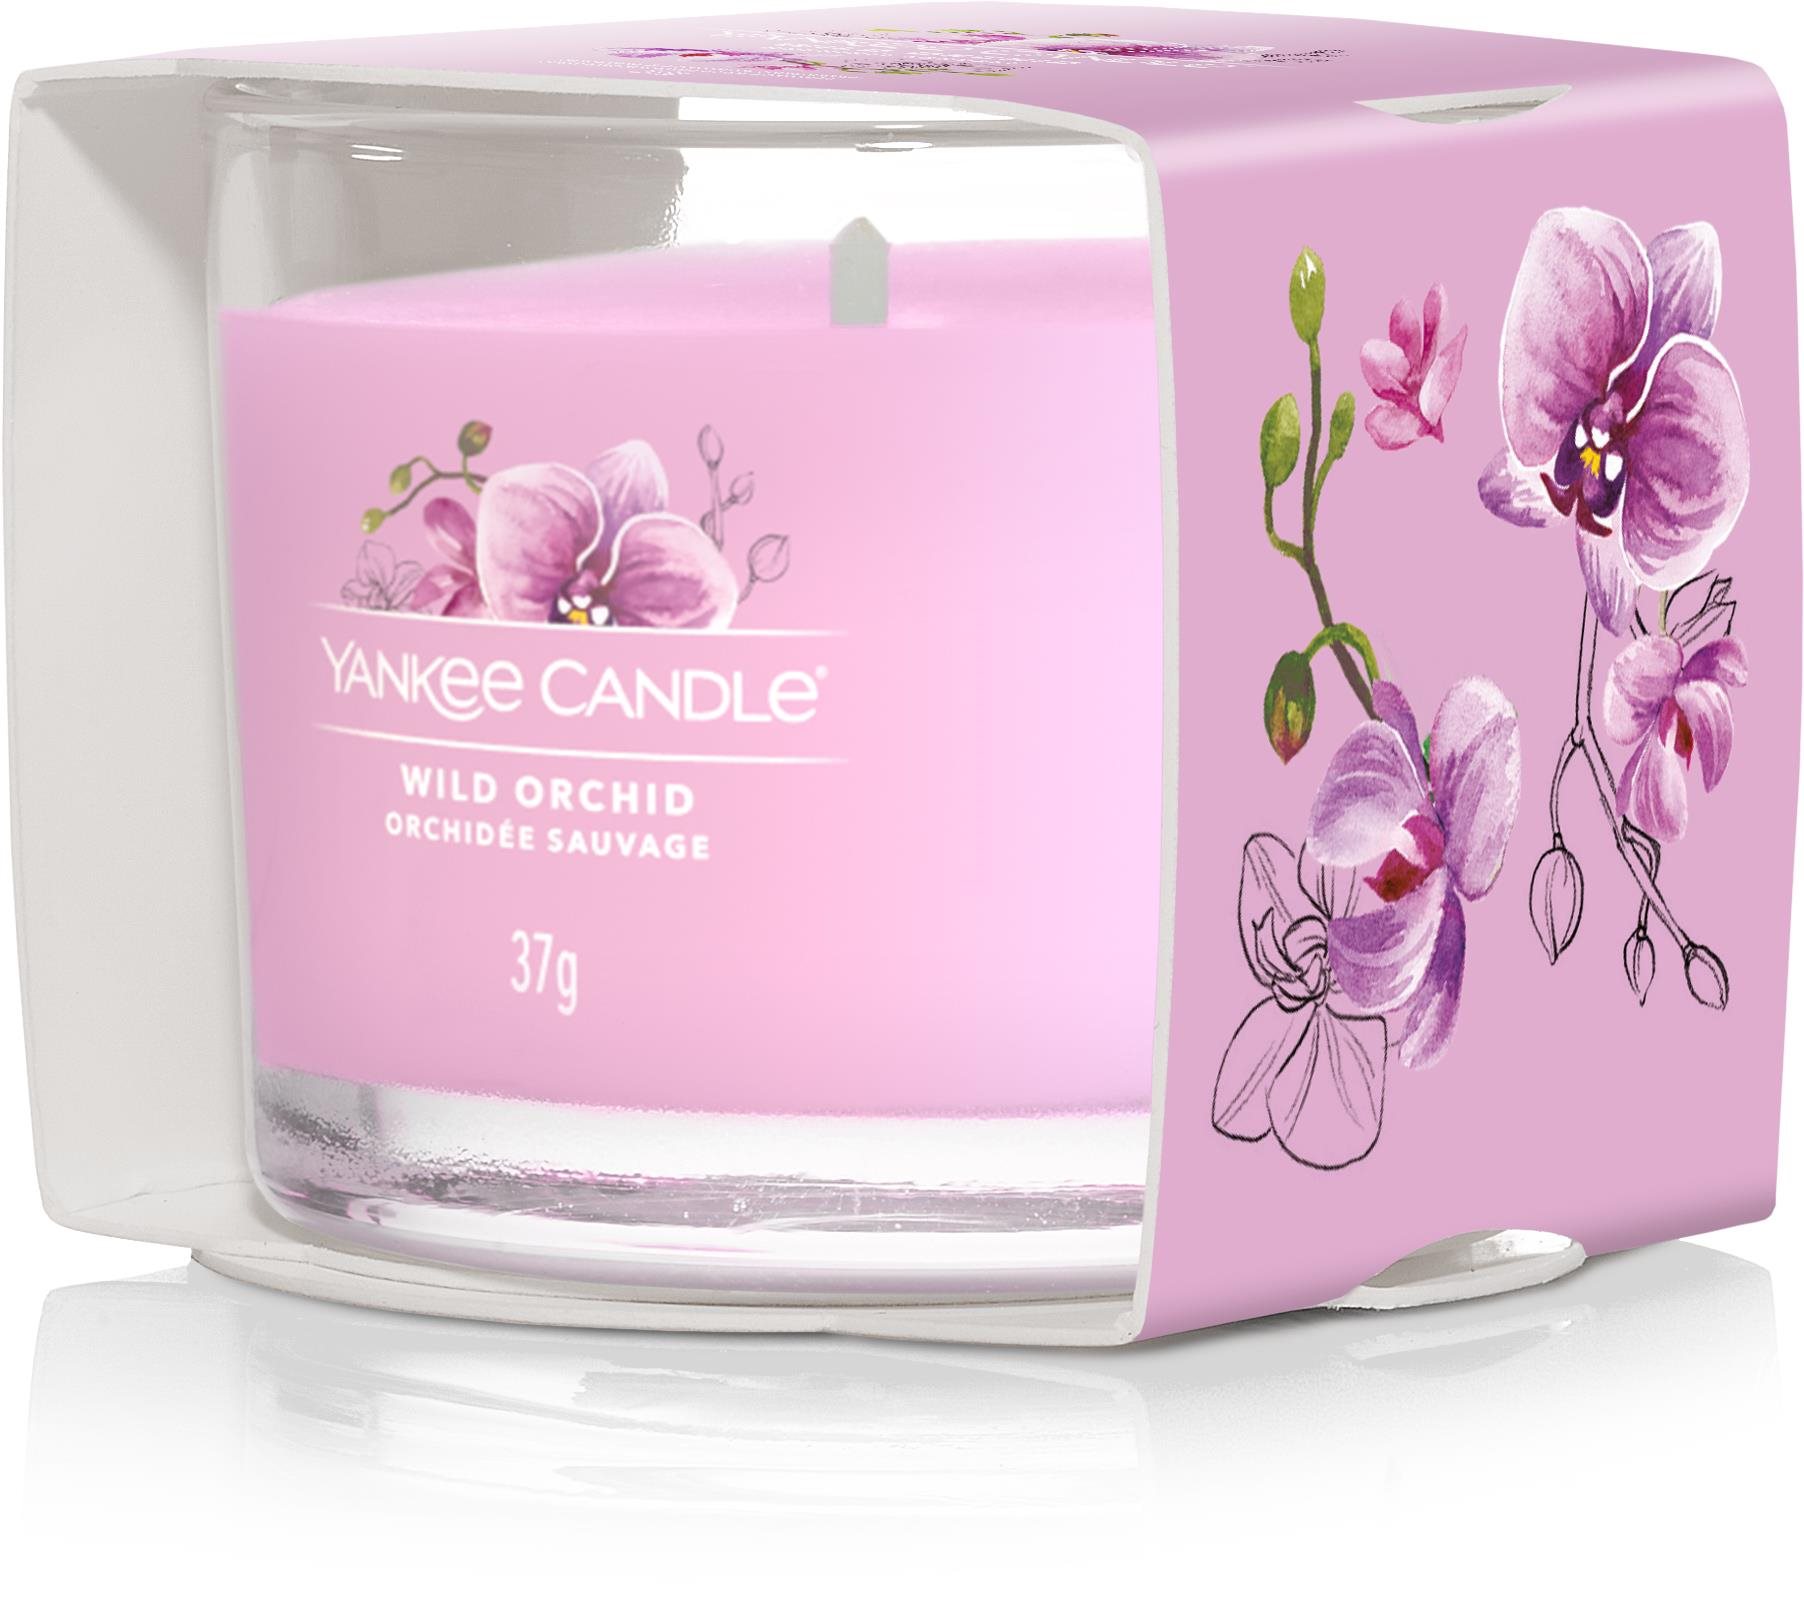 YANKEE CANDLE Wild Orchid Sampler 37 g